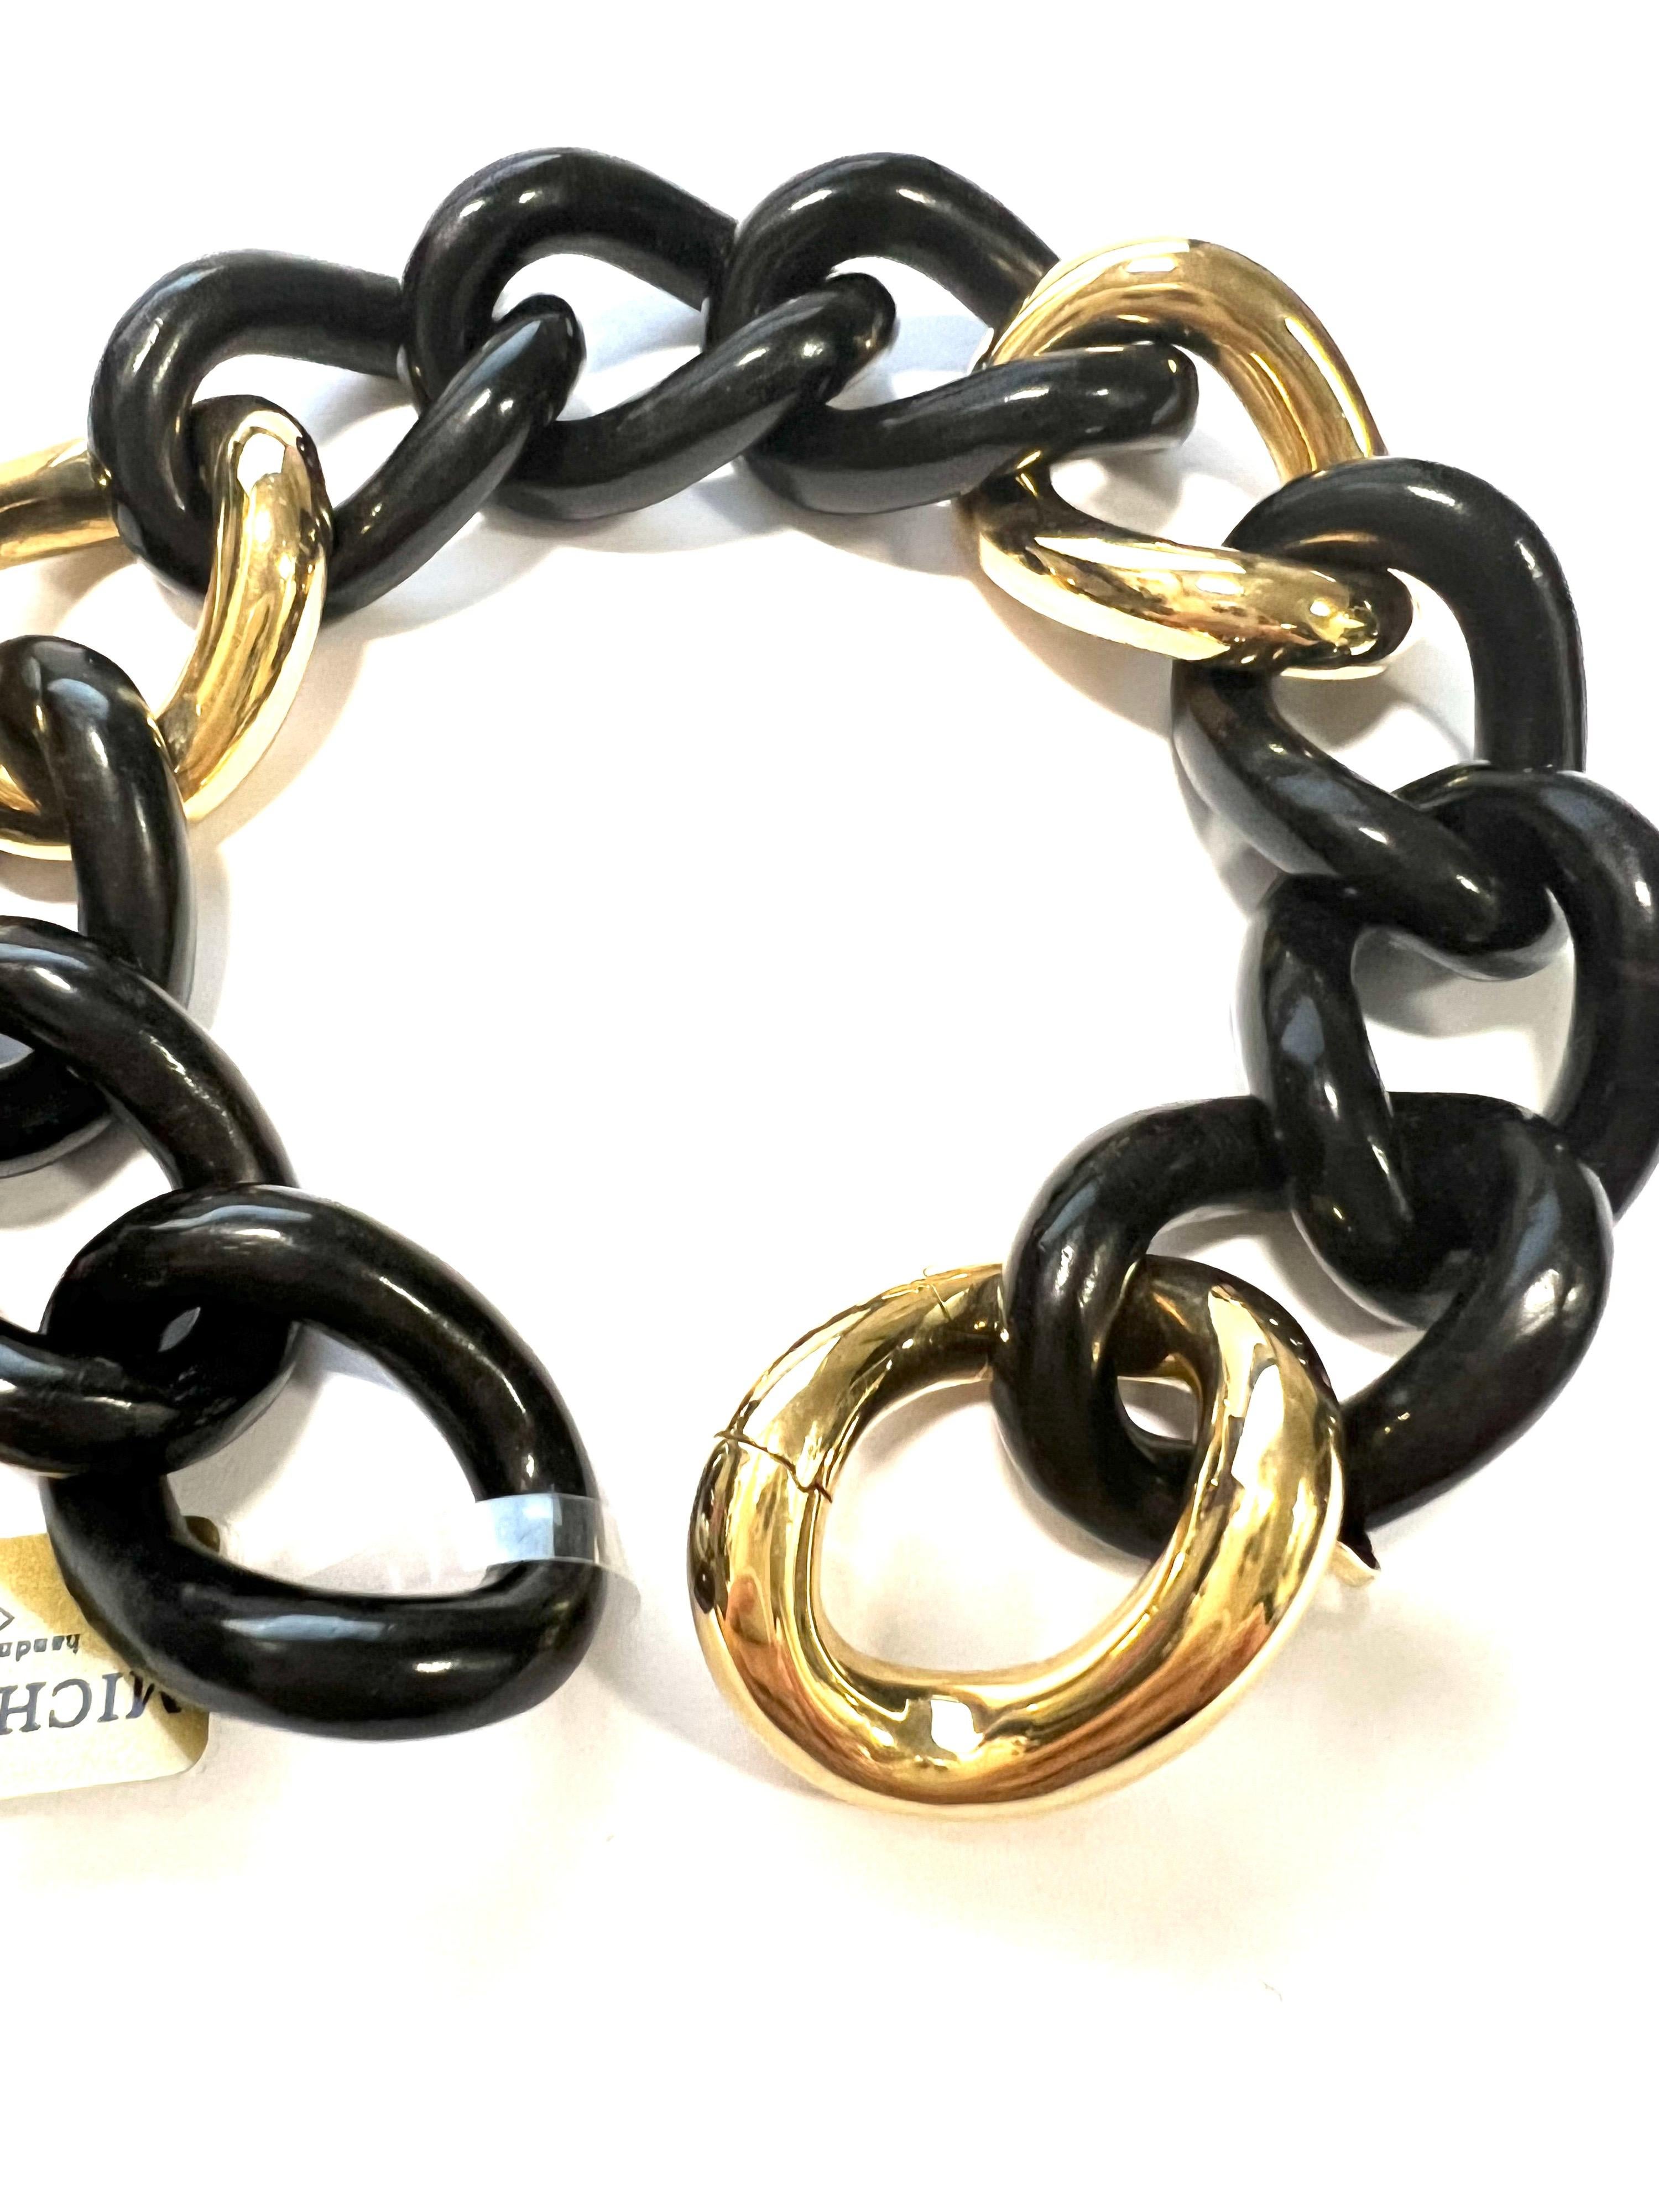 18K Yellow Gold And Ebony Groumette Bracelet
This bracelet has a hidden opening.

Total Weight gr. 40.5
Gold weight gr. 20.6
Length cm. 21
Stamp ITALY, 10 MI, 750.

